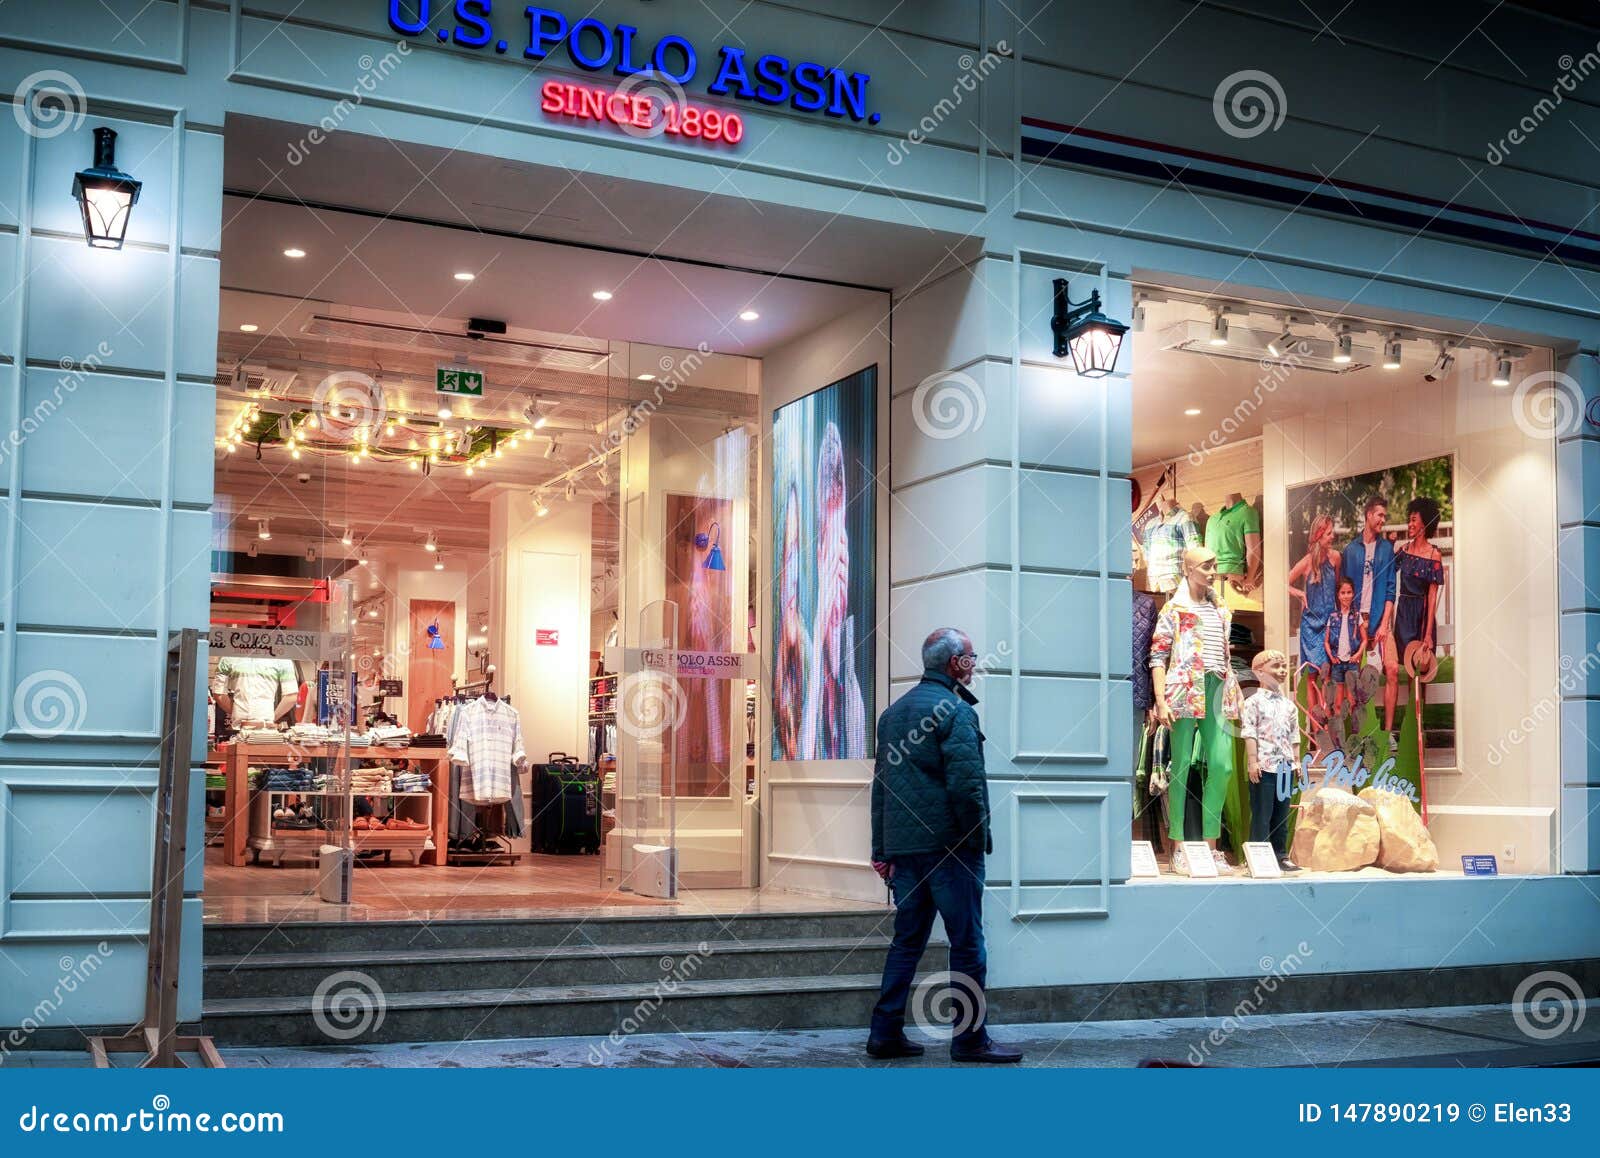 US Polo ASSN Store Windows in Istiklal Avenue. Editorial Stock